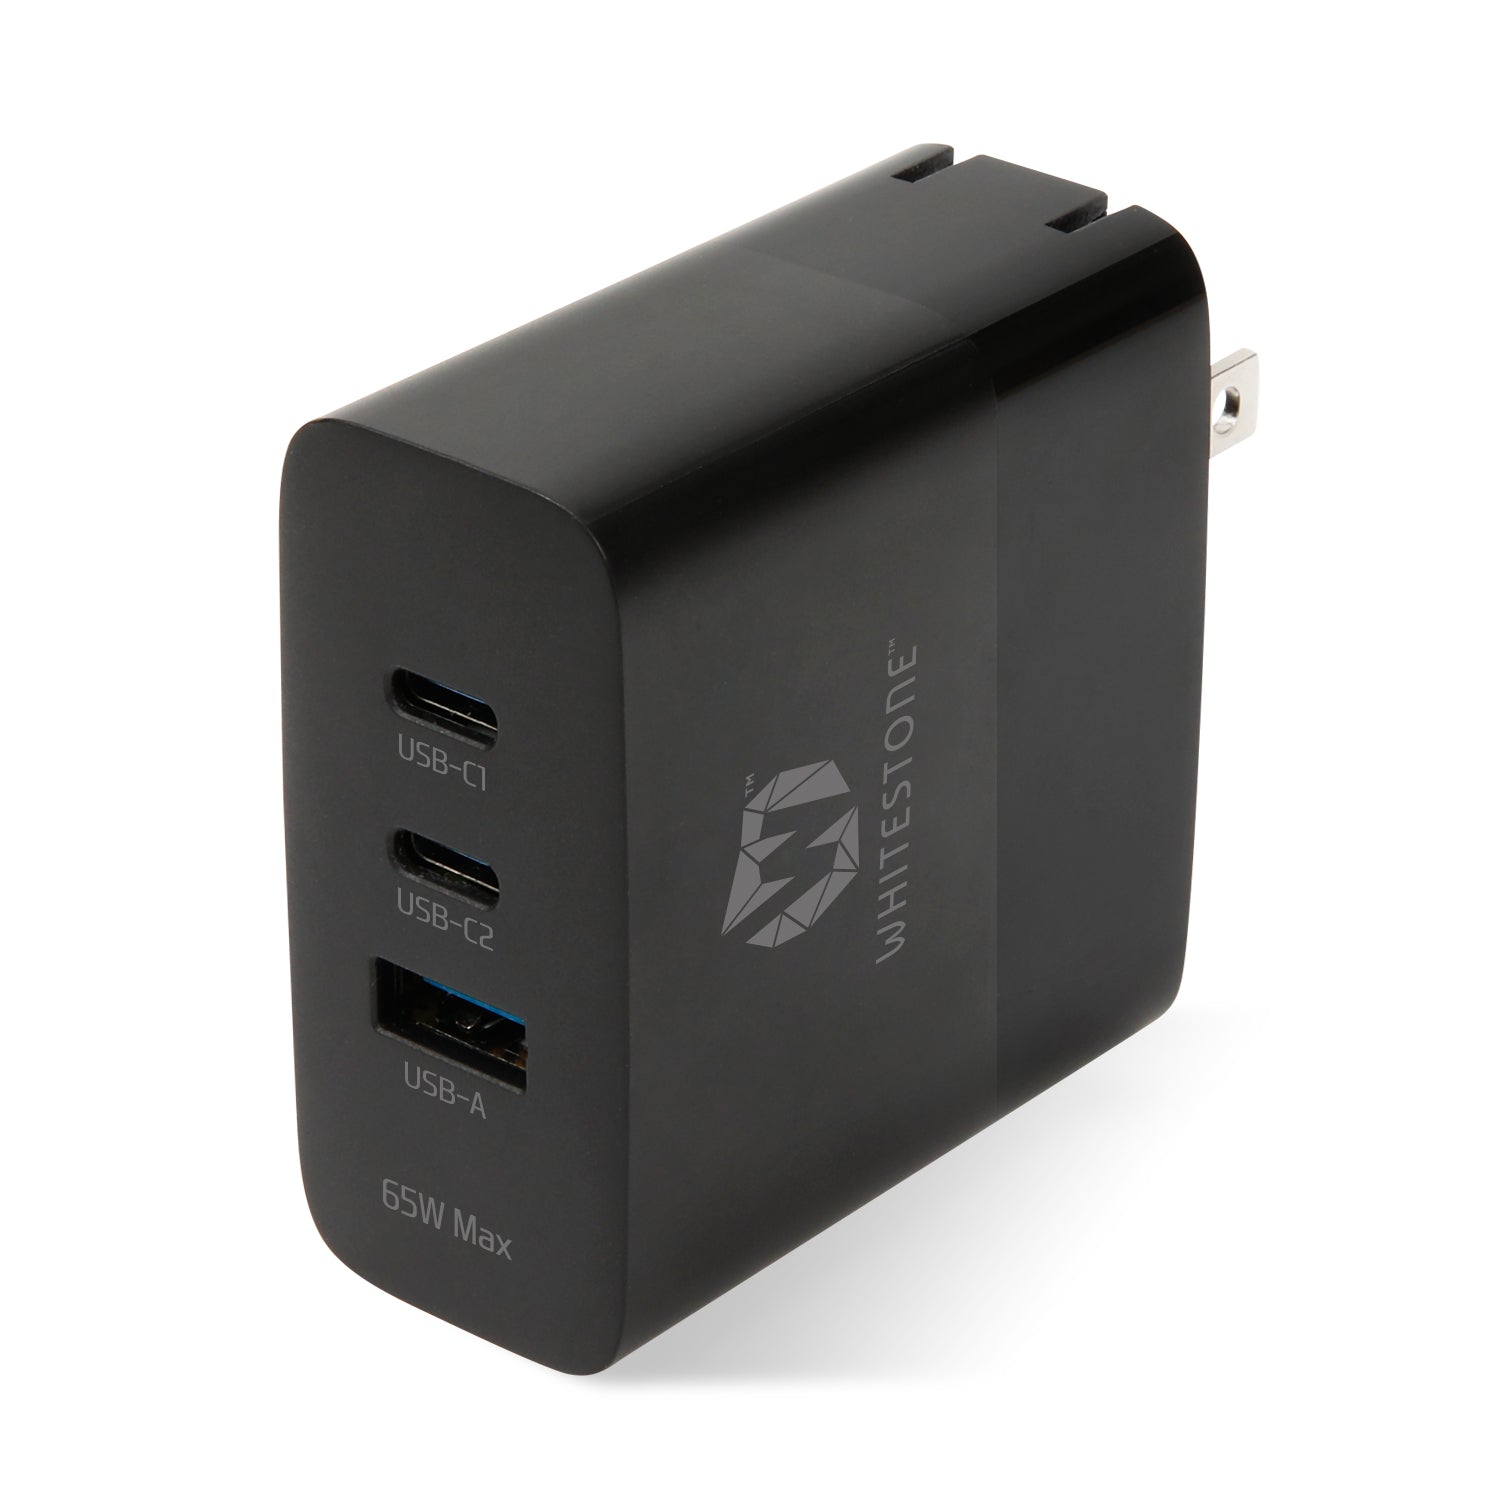 65W Dual Port USB-C and USB-A Power Adapter